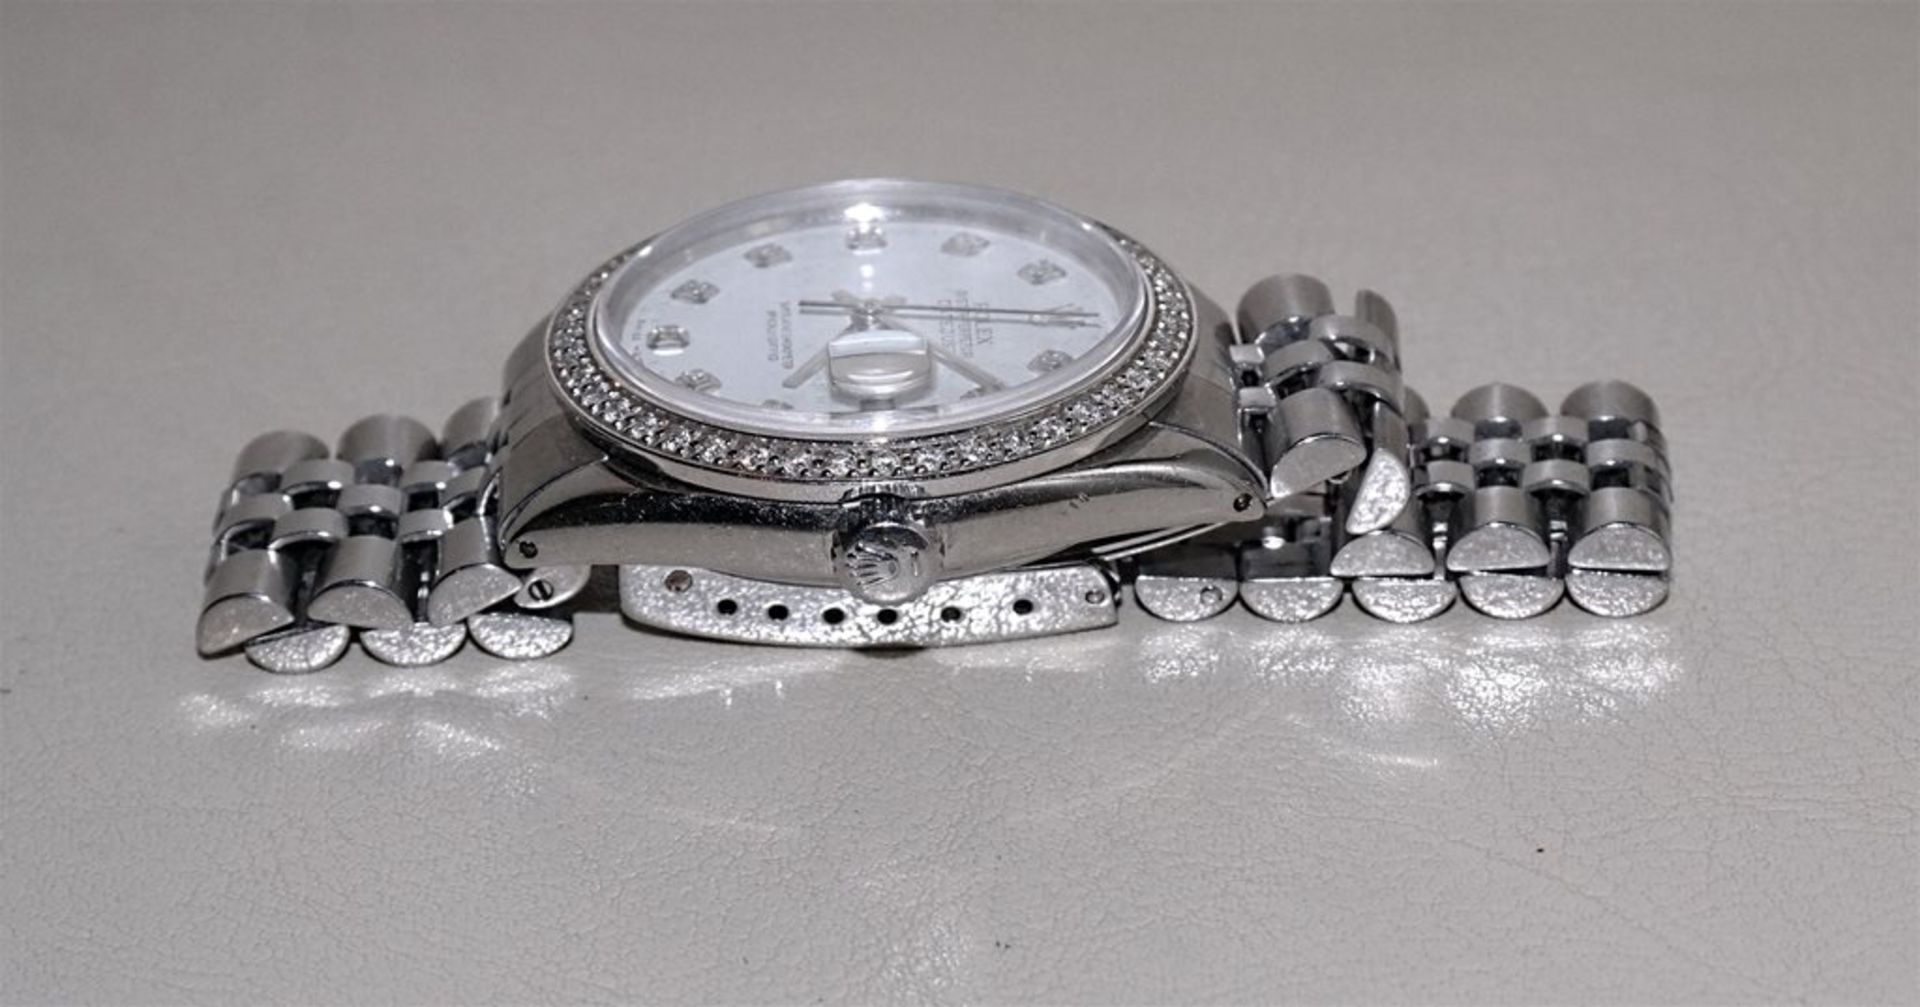 Mens Rolex Oyster Perpetual Datejust, White Diamond Dial 36mm - Image 3 of 5